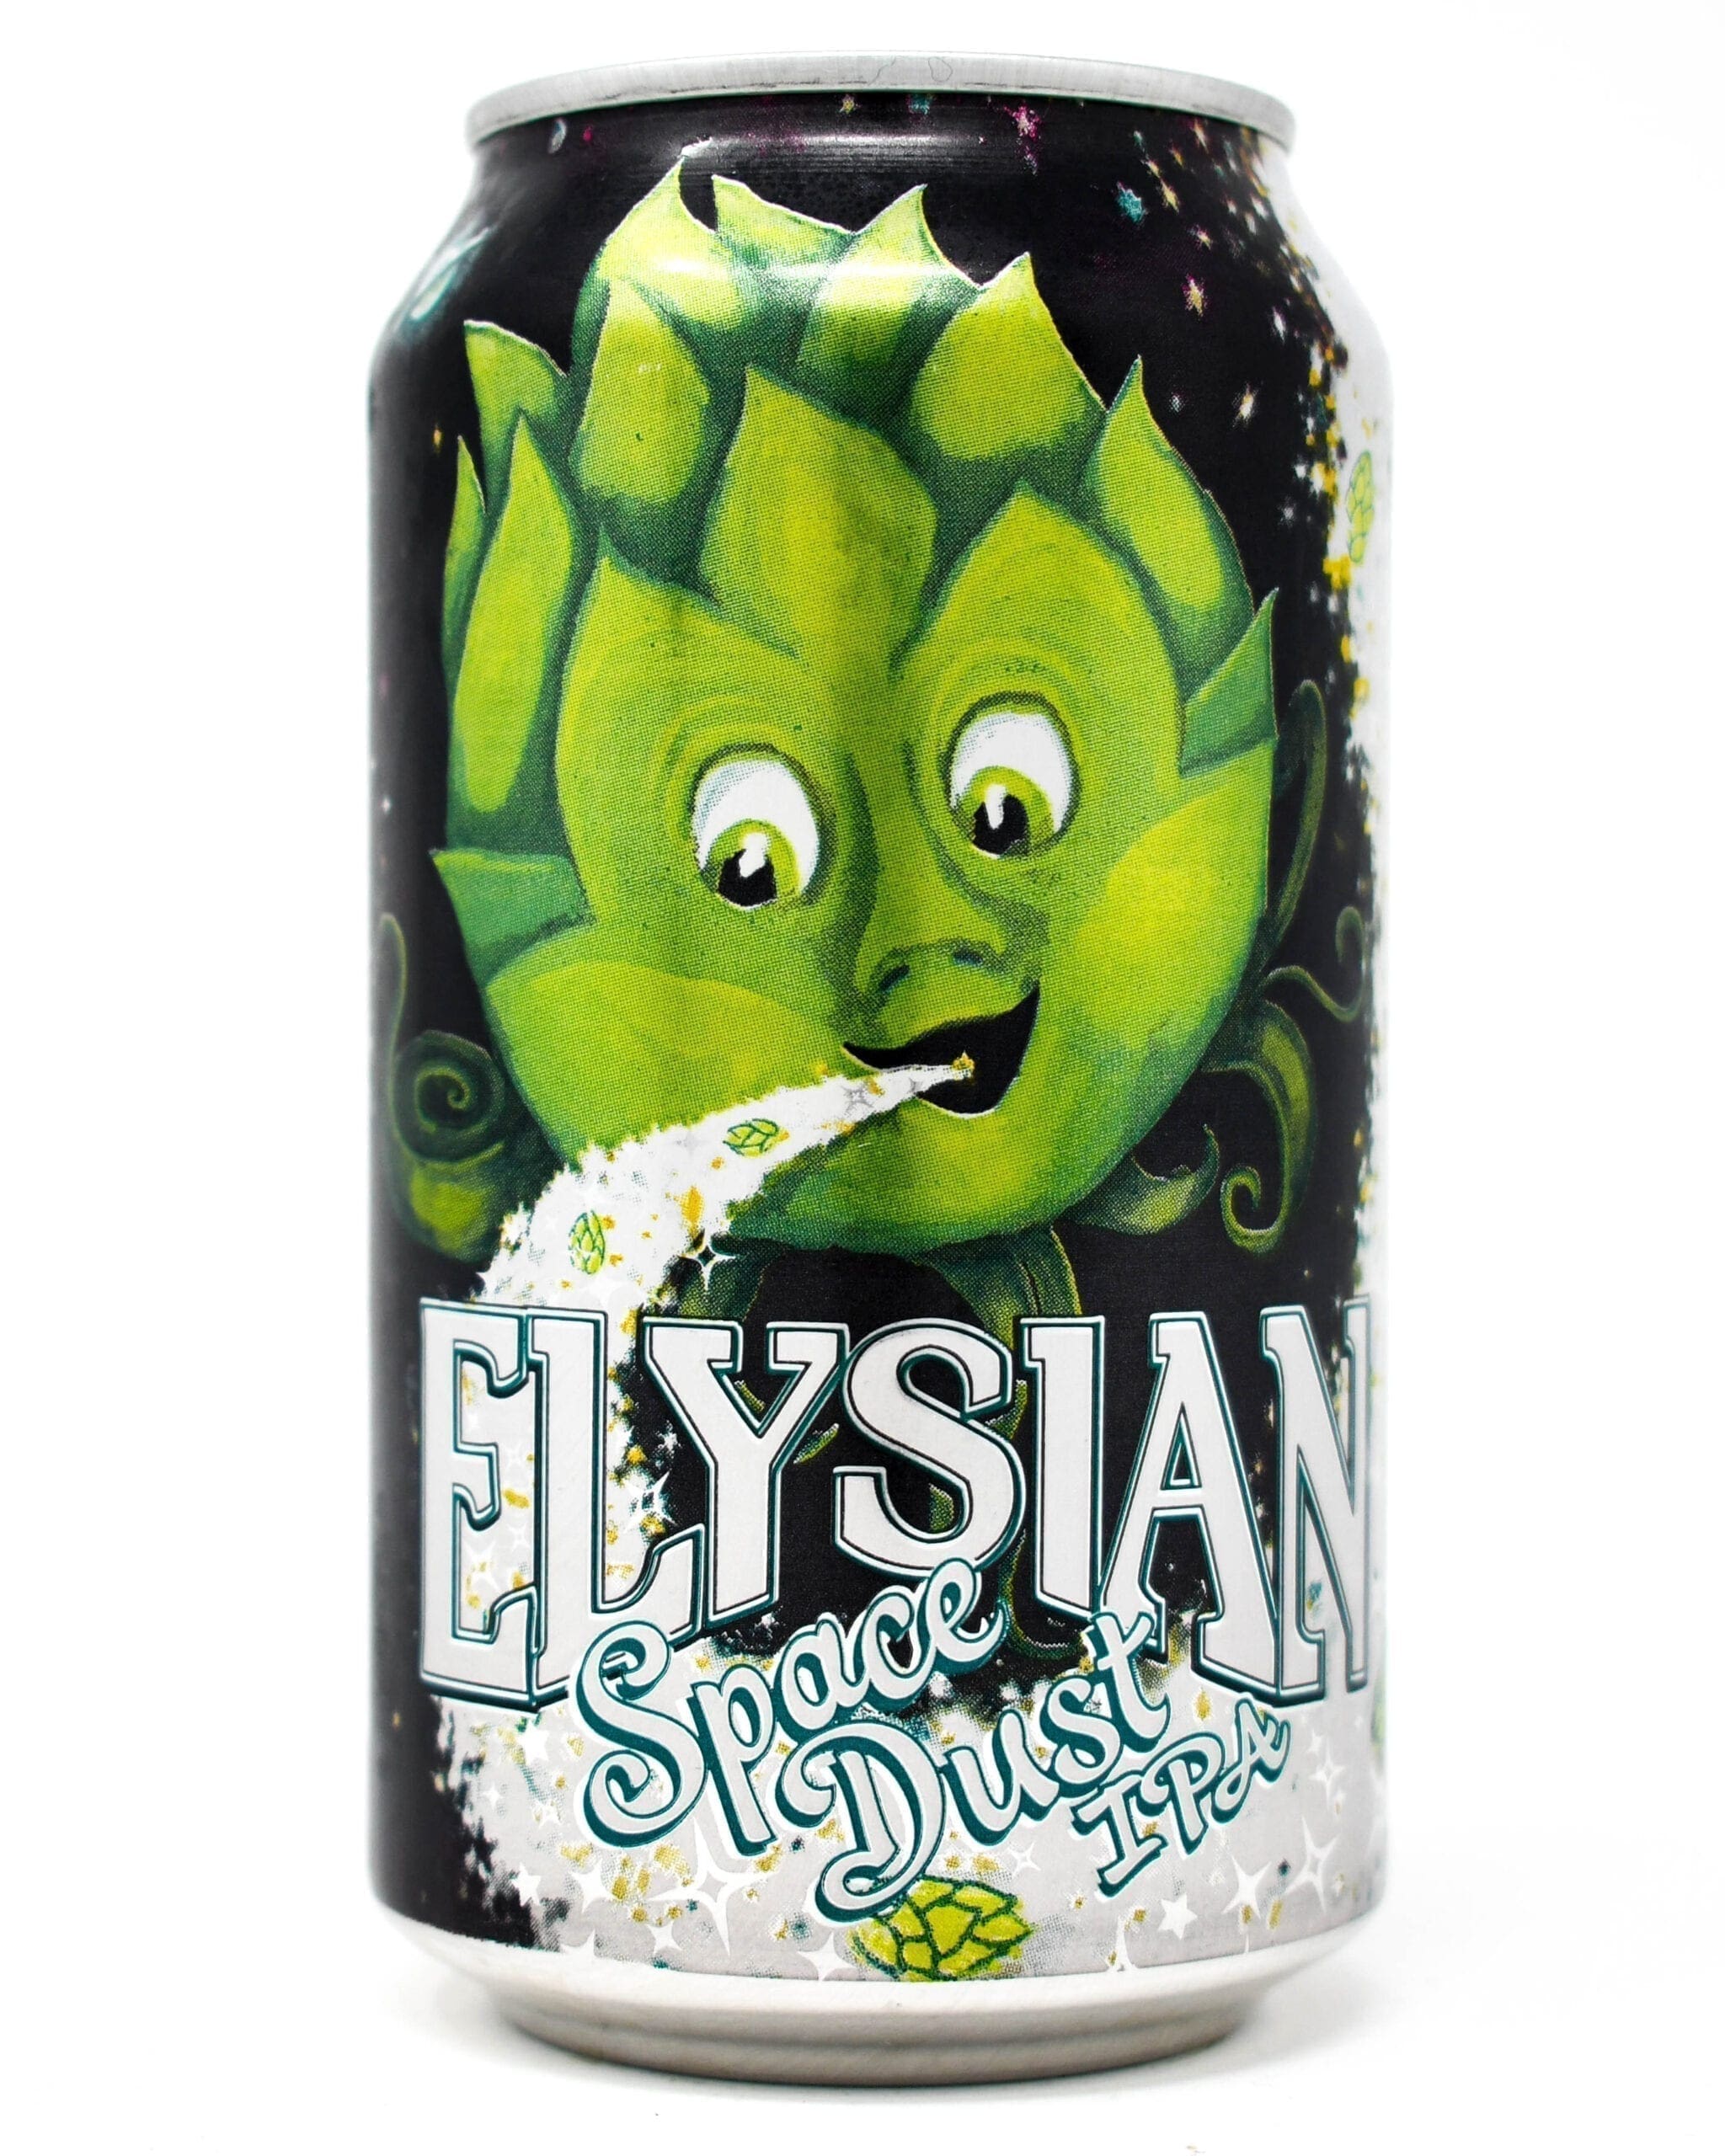 elysian-brewing-company-space-dust-ipa-12oz-cans-princeville-wine